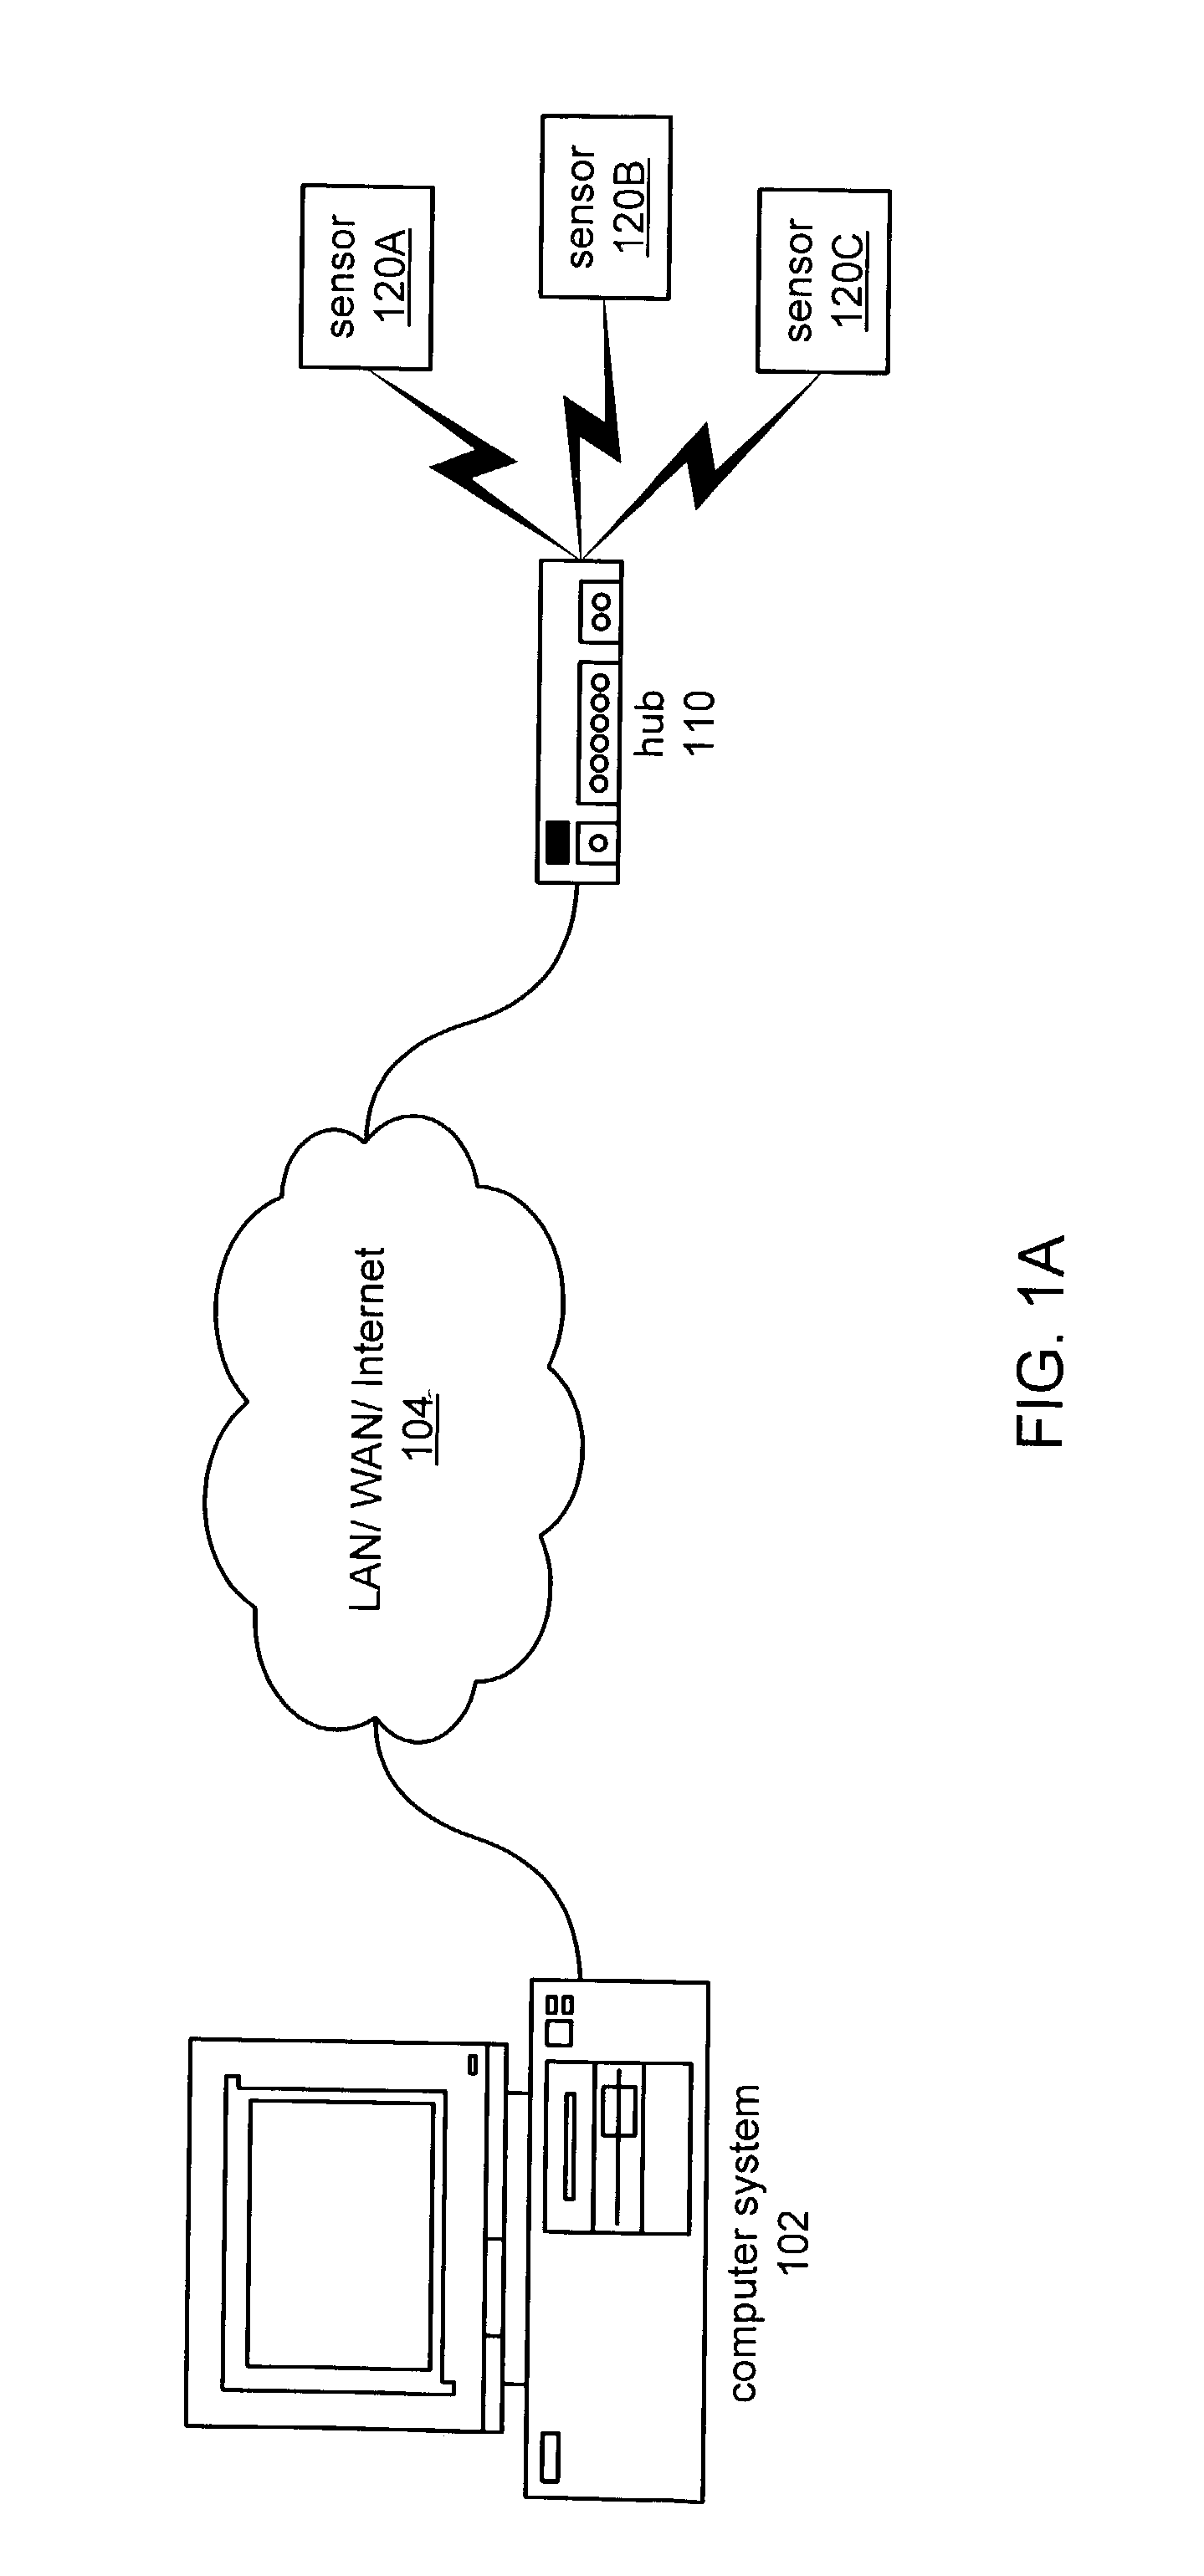 Wireless deployment / distributed execution of graphical programs to smart sensors